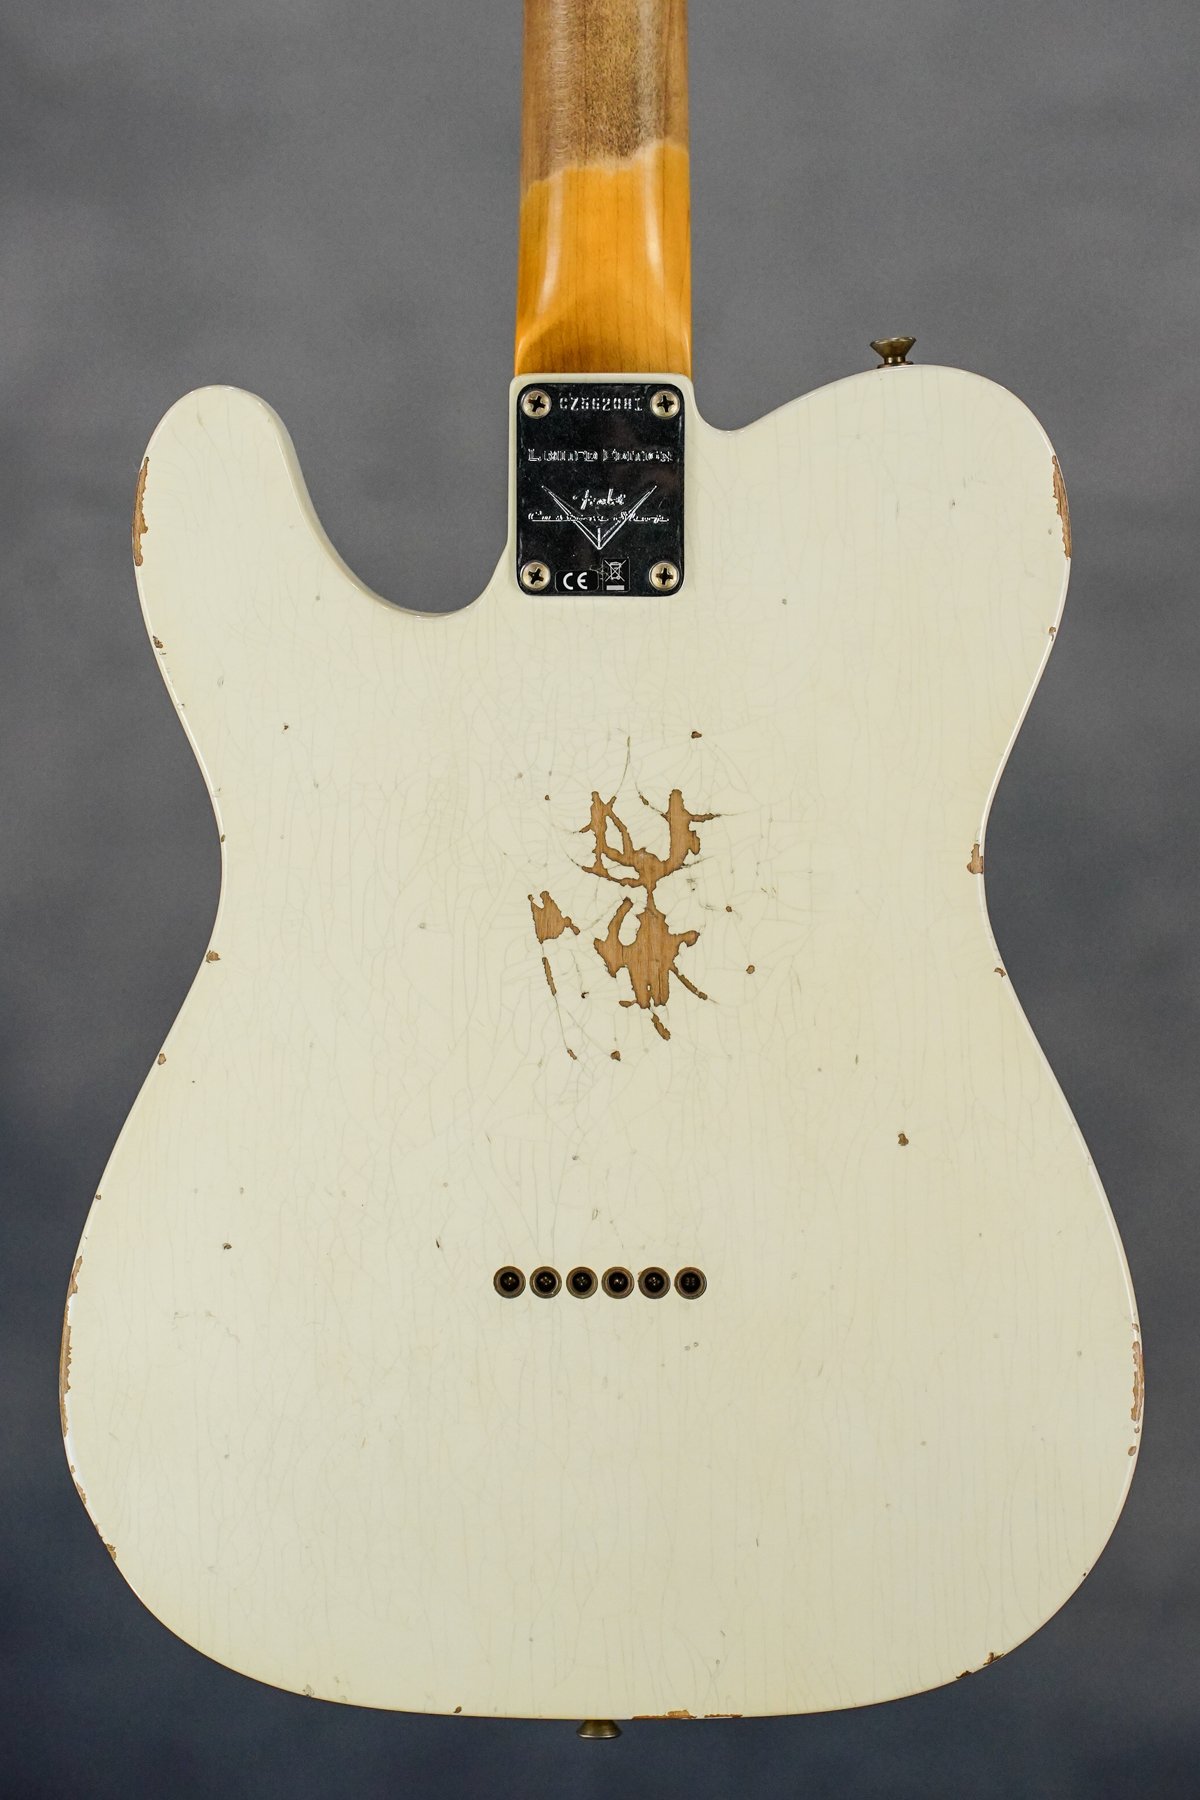 S21 LTD 61 TELE REL - AOLW
Fender Custom Shop Limited Edition '61 Telecaster Relic Electric Guitar - Aged Olympic White